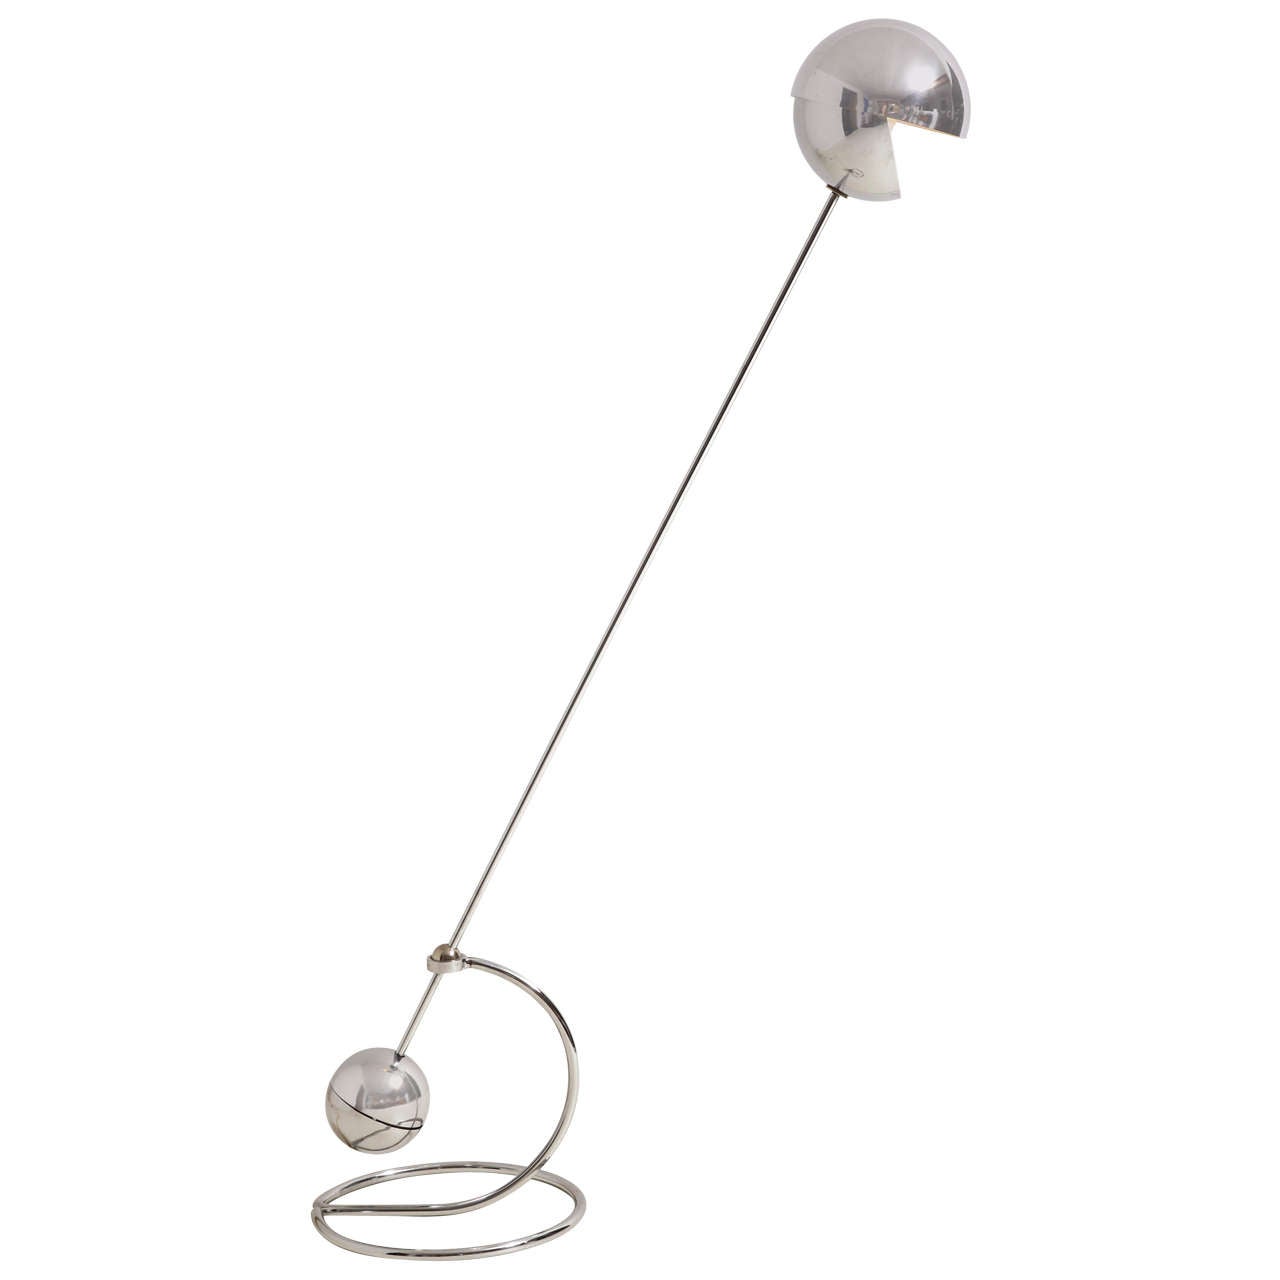 Rare Floor Lamp "3s" Adjustable by Paolo Tilche